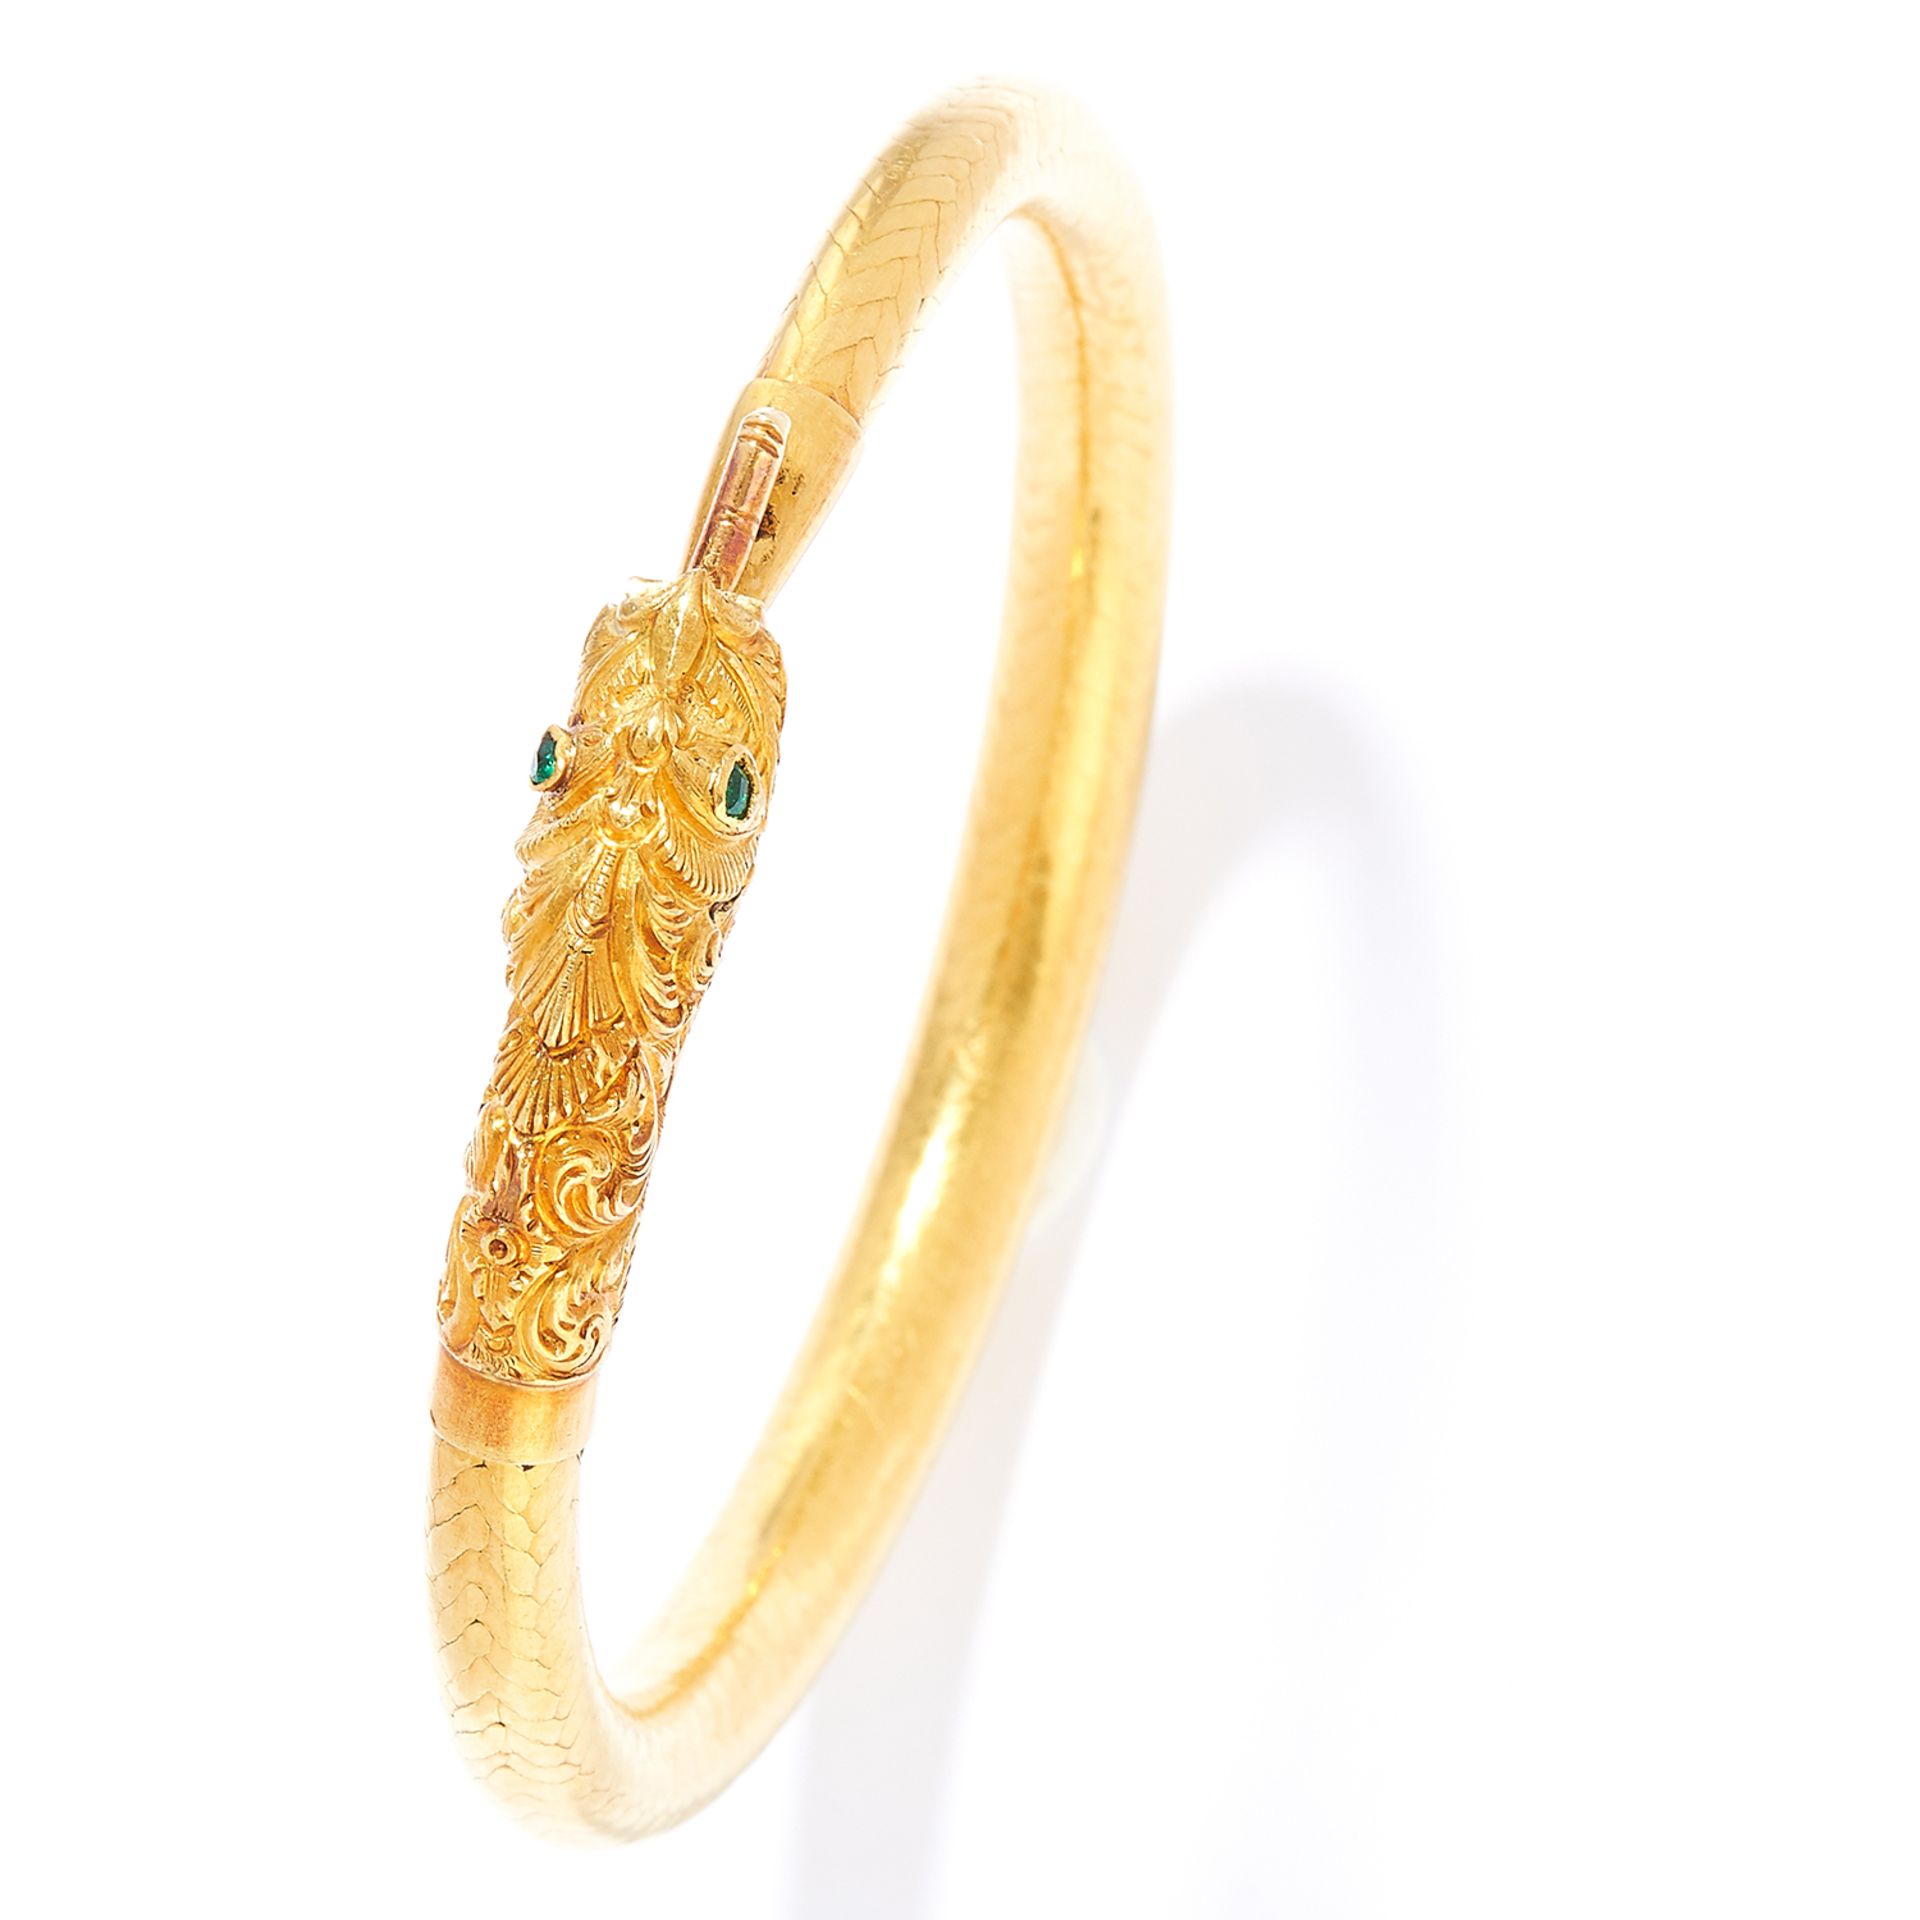 ANTIQUE CHINESE EMERALD DRAGON BANGLE, 19TH CENTURY in high carat yellow gold, with round cut